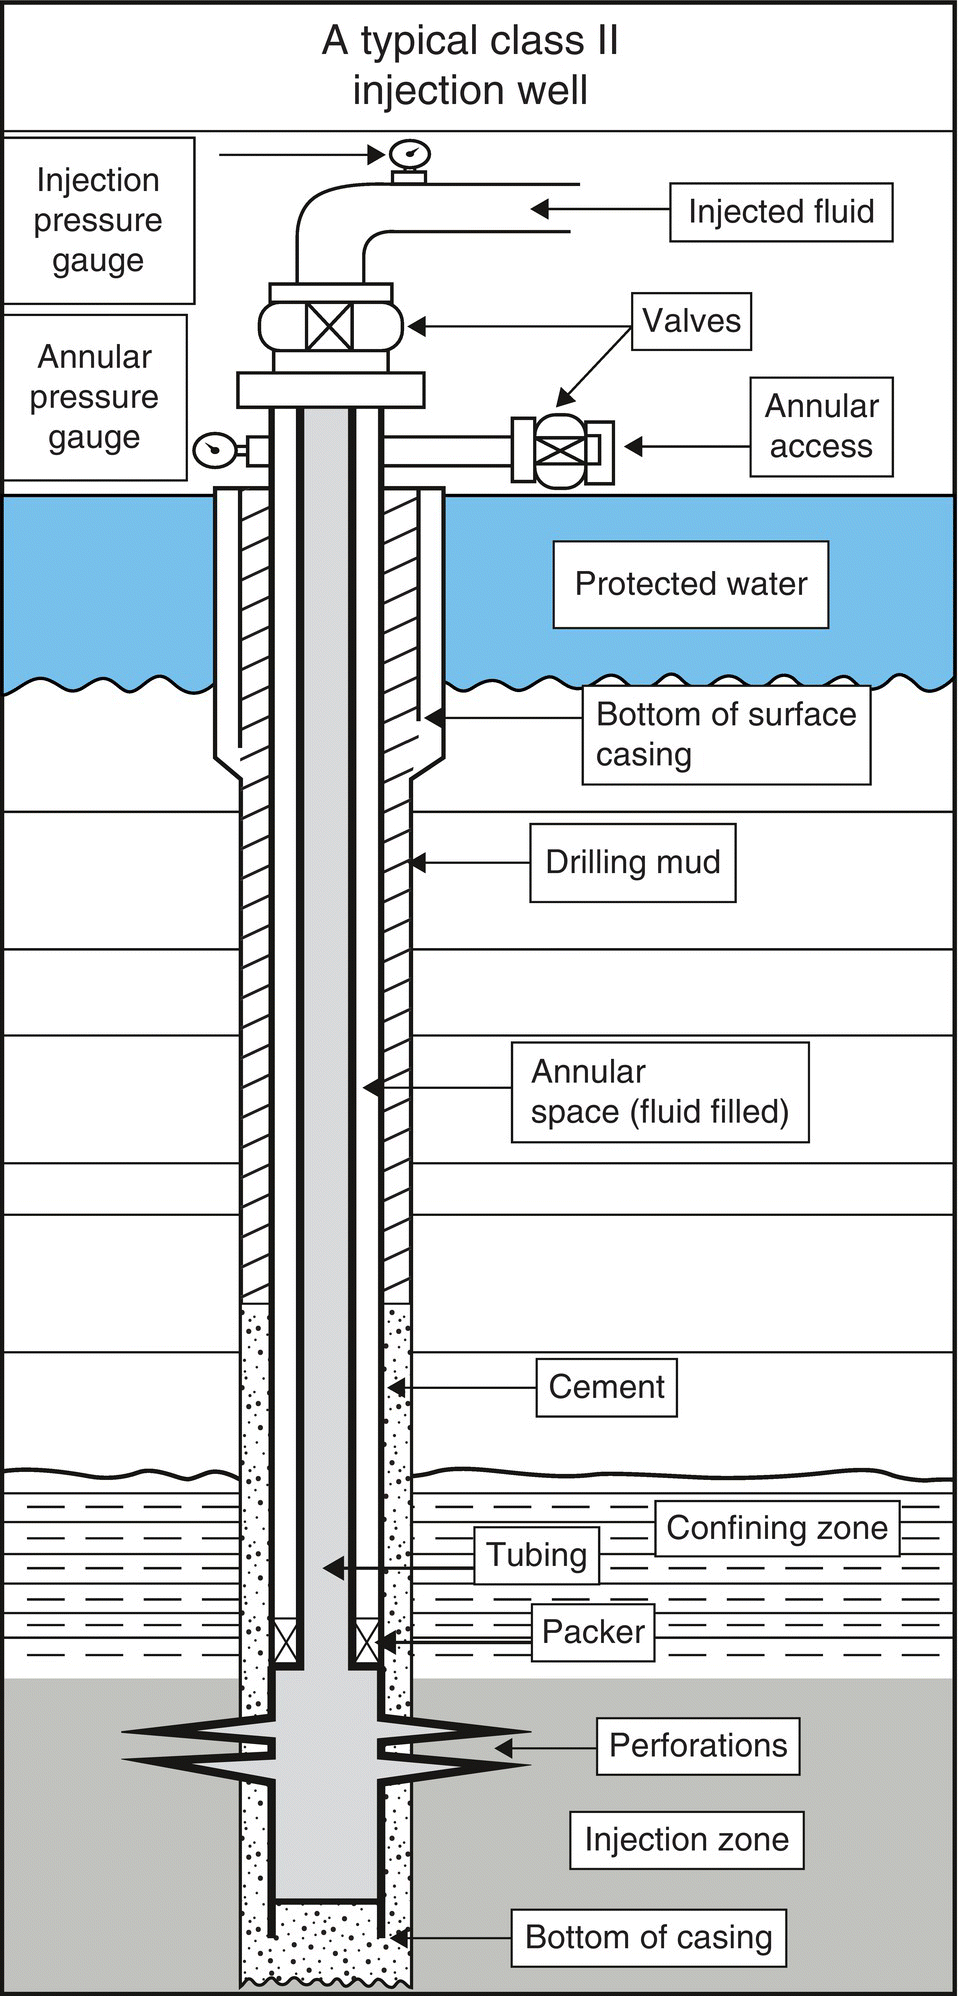 Schematic illustrating a typical injection well, with parts labeled injection pressure gauge, annular pressure gauge, injected fluid, valves, annular access, protected water, bottom of surface, etc.